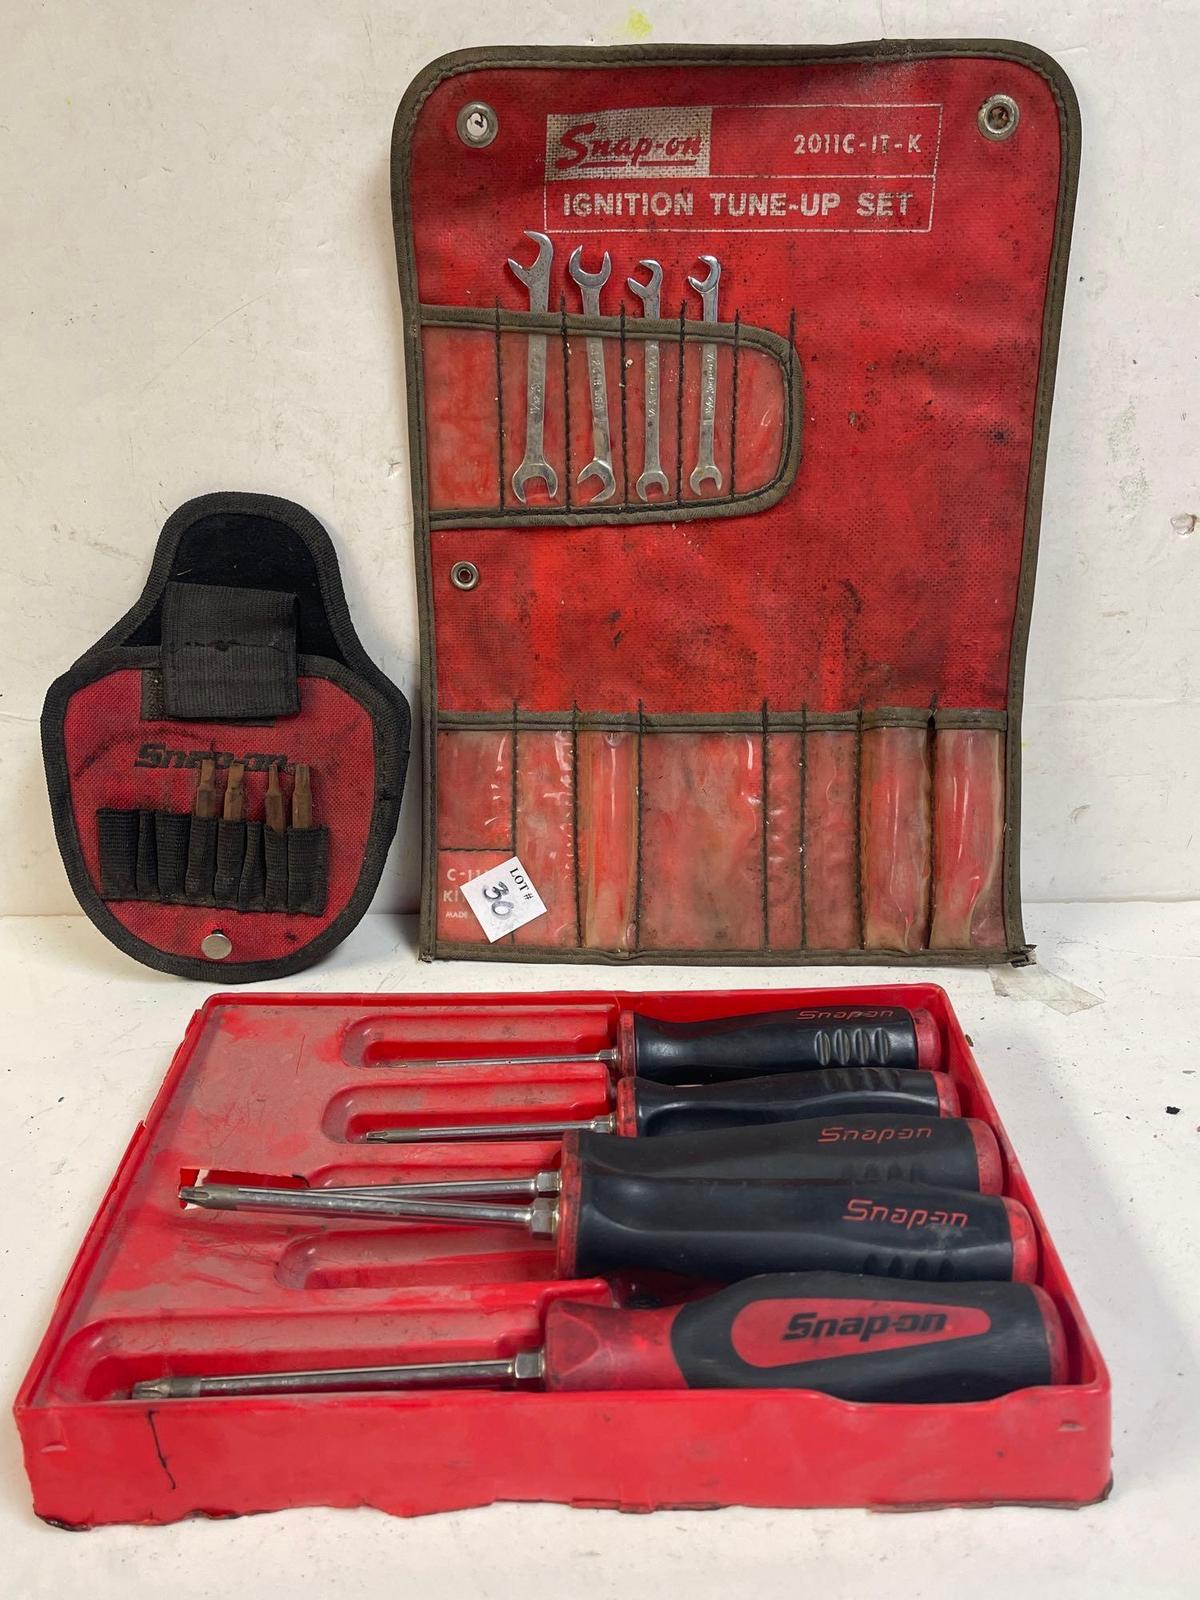 Snap-On Tools Driver Set with Other Incomplete Snap-on Sets